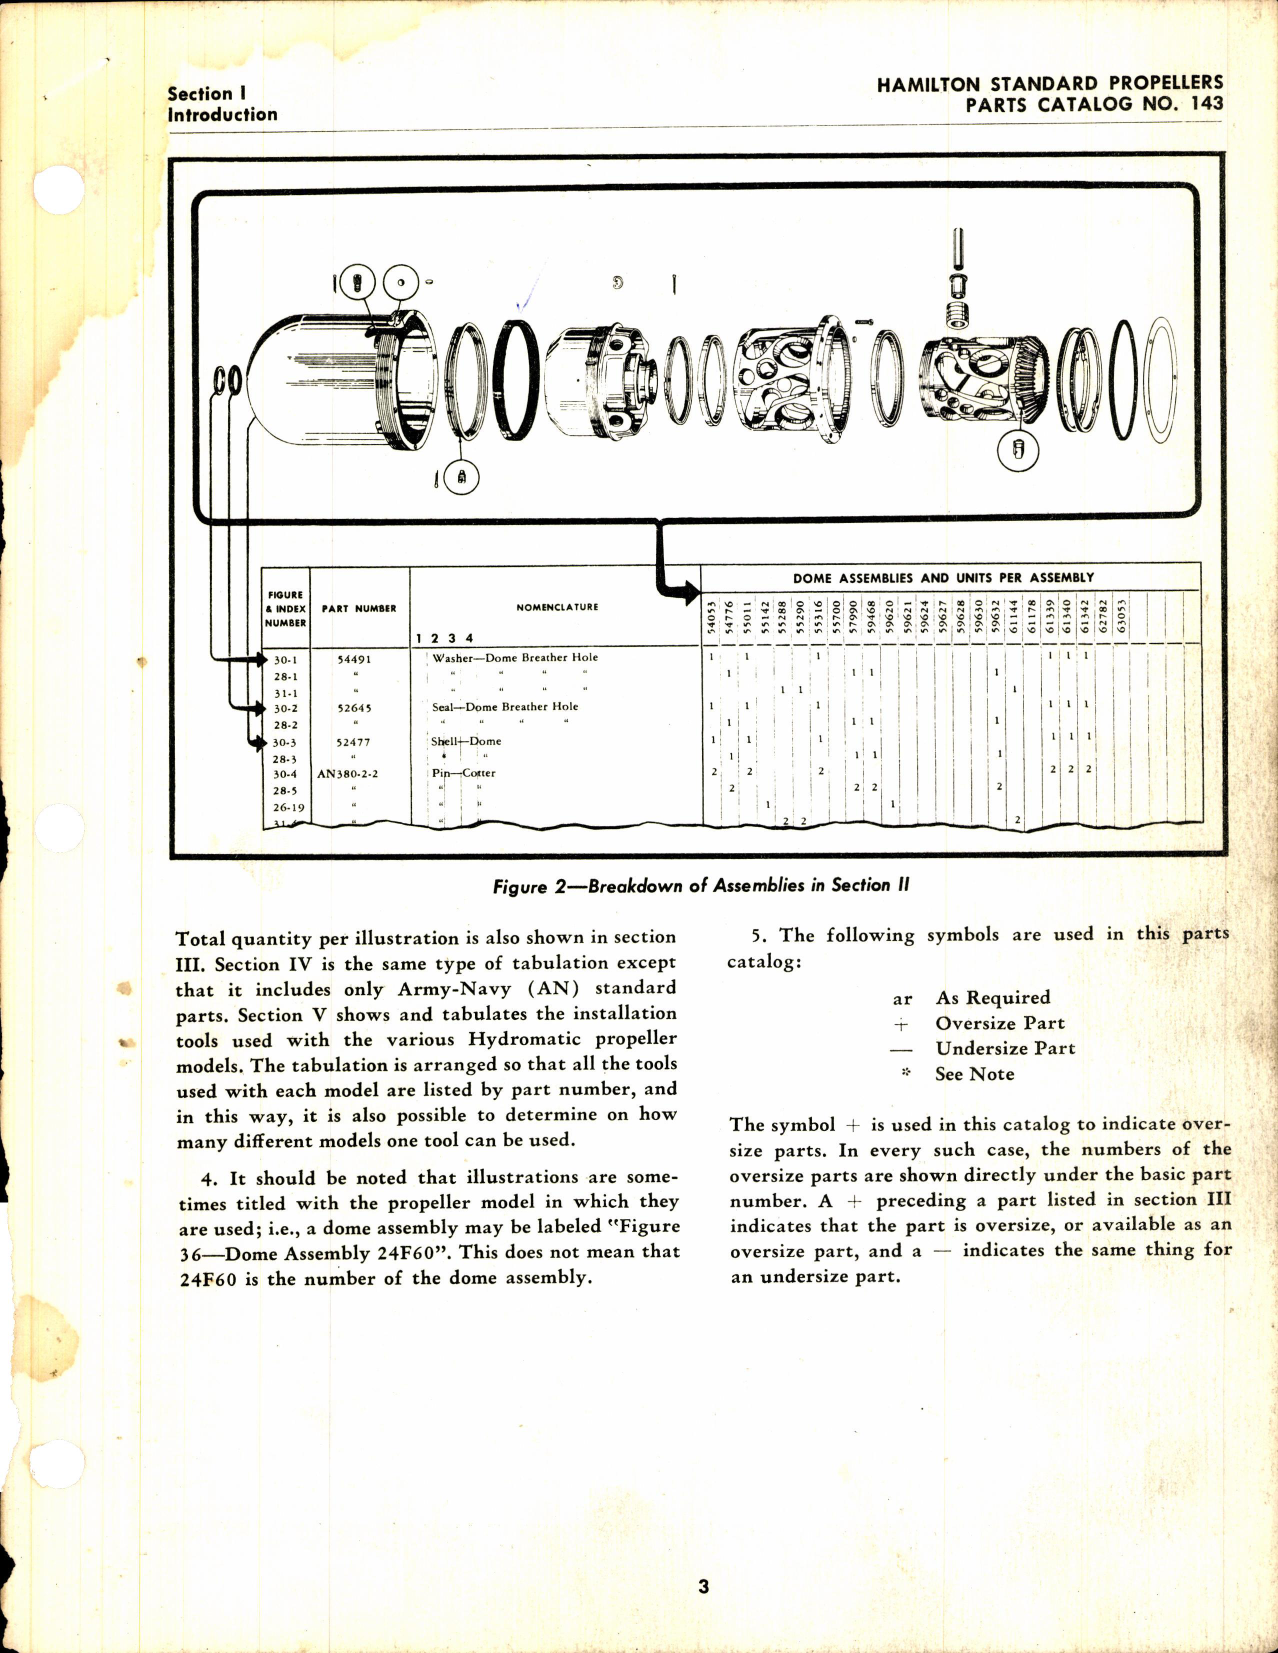 Sample page 5 from AirCorps Library document: Hydromatic Propellers Parts Catalog